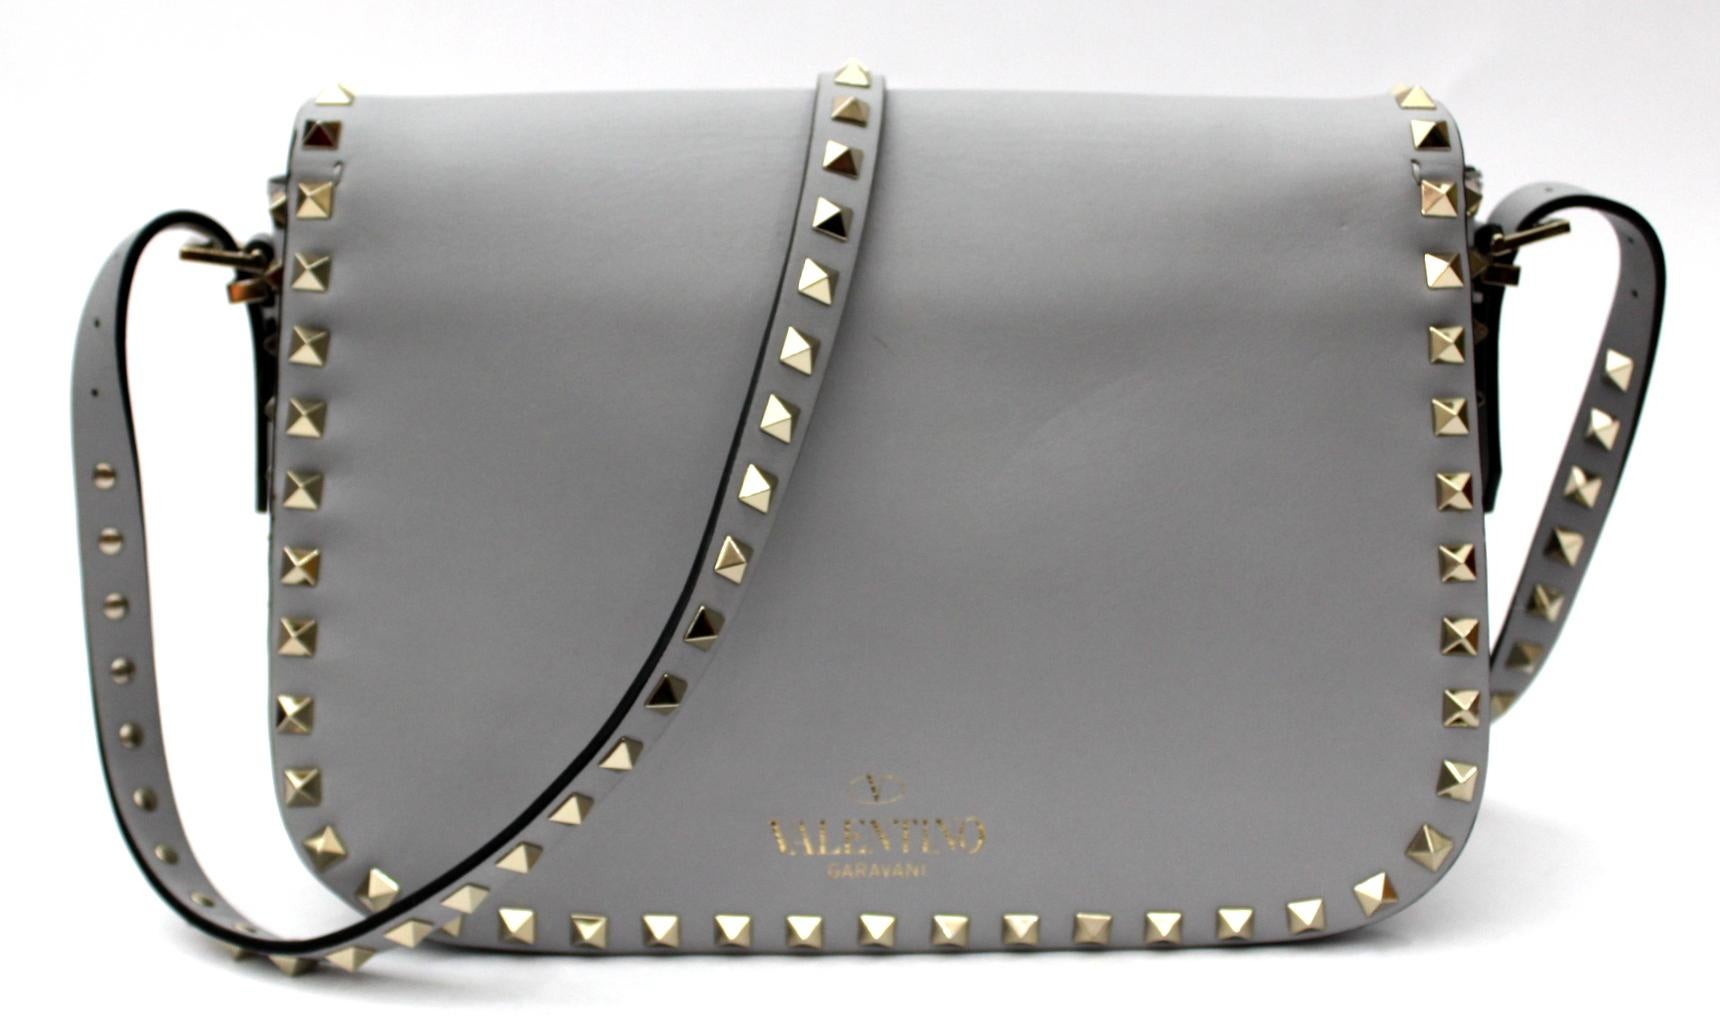 Valentino handbag Rockstud model in gtigia leather, typically covered with studs with structured shapes,
this collection is very sought after.
This medium-sized bag is perfect for when you want to travel light.
This bag has the classic Valentino